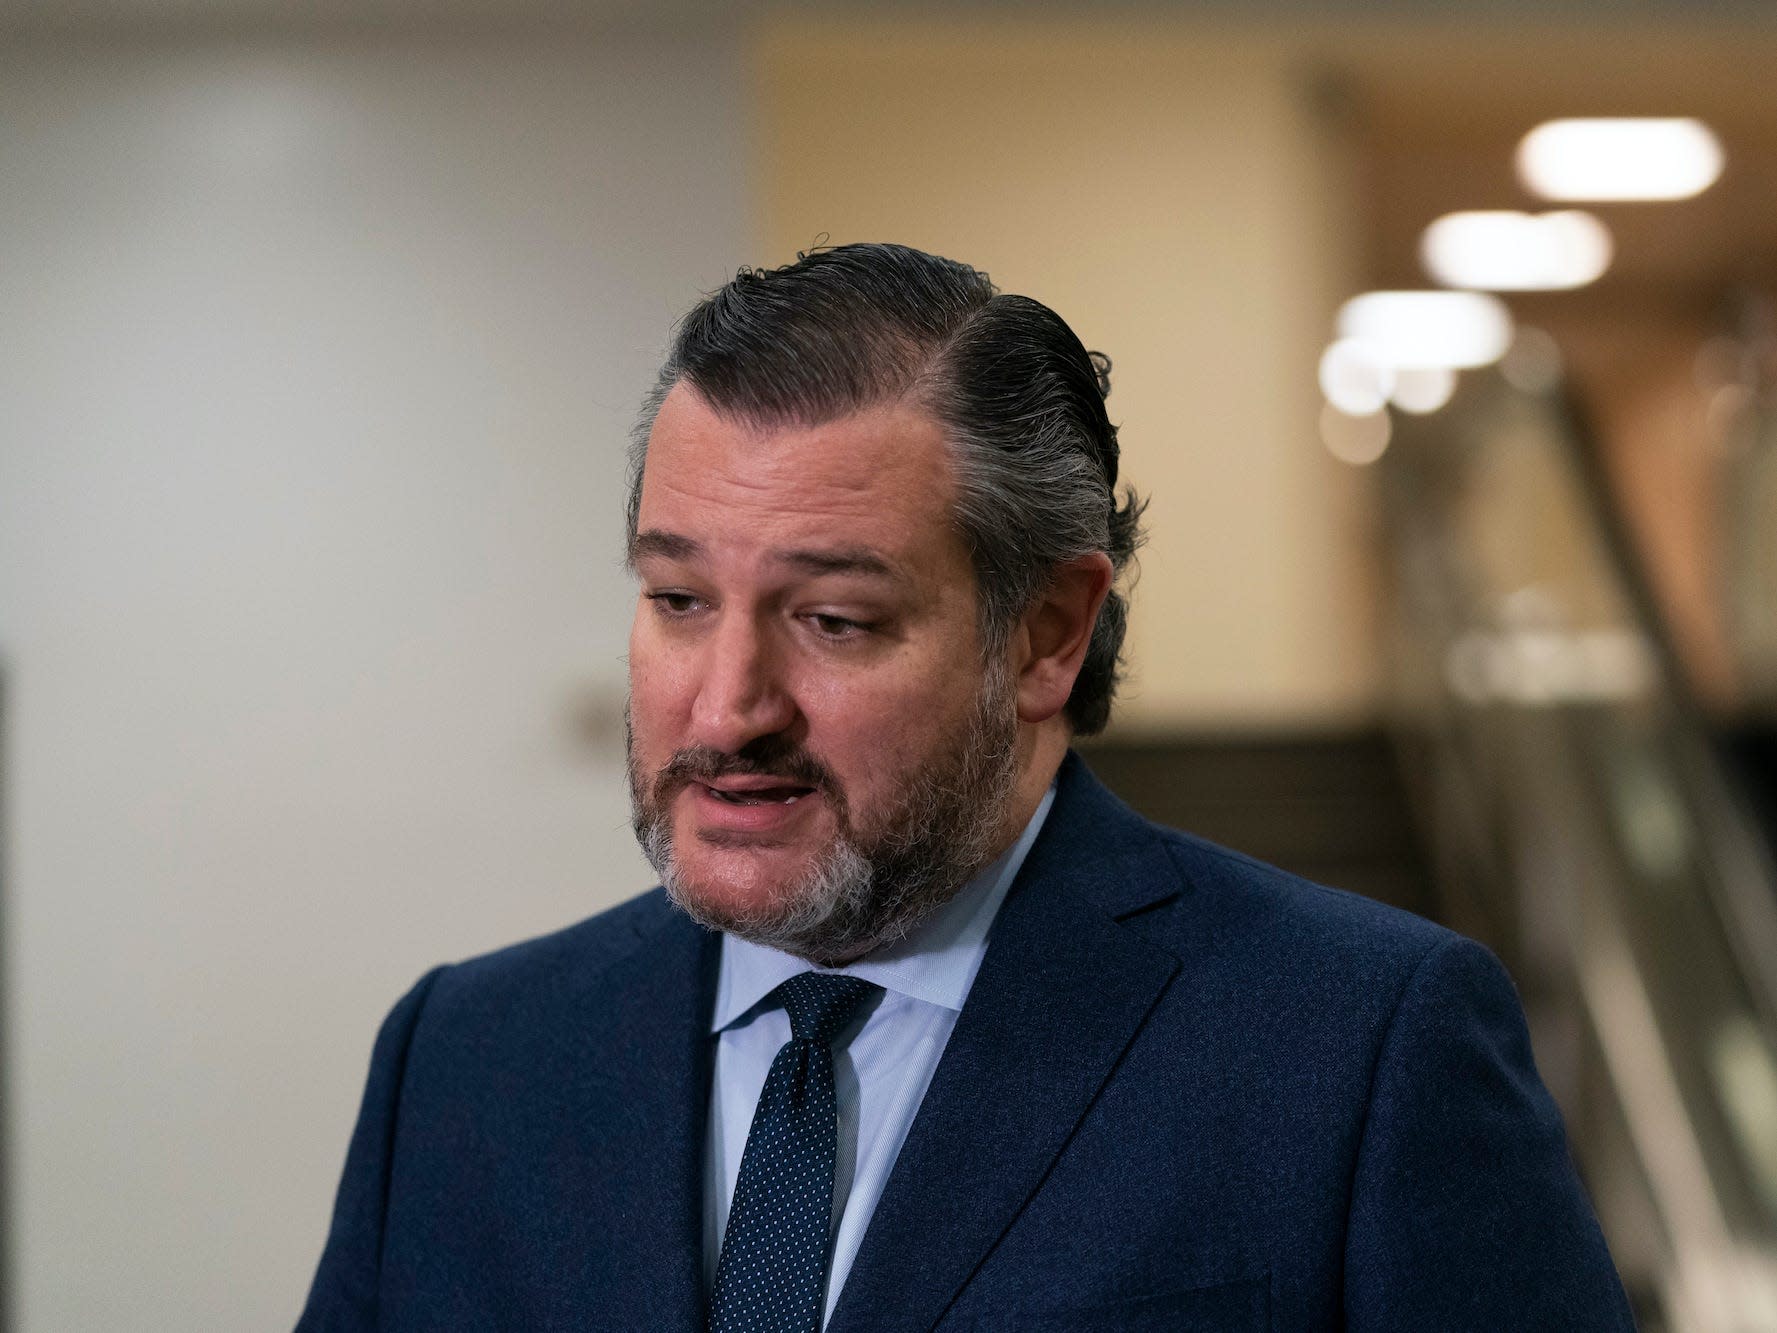 Ted Cruz responds after viral tweet mocking California’s energy policy reappears amid storm in Texas